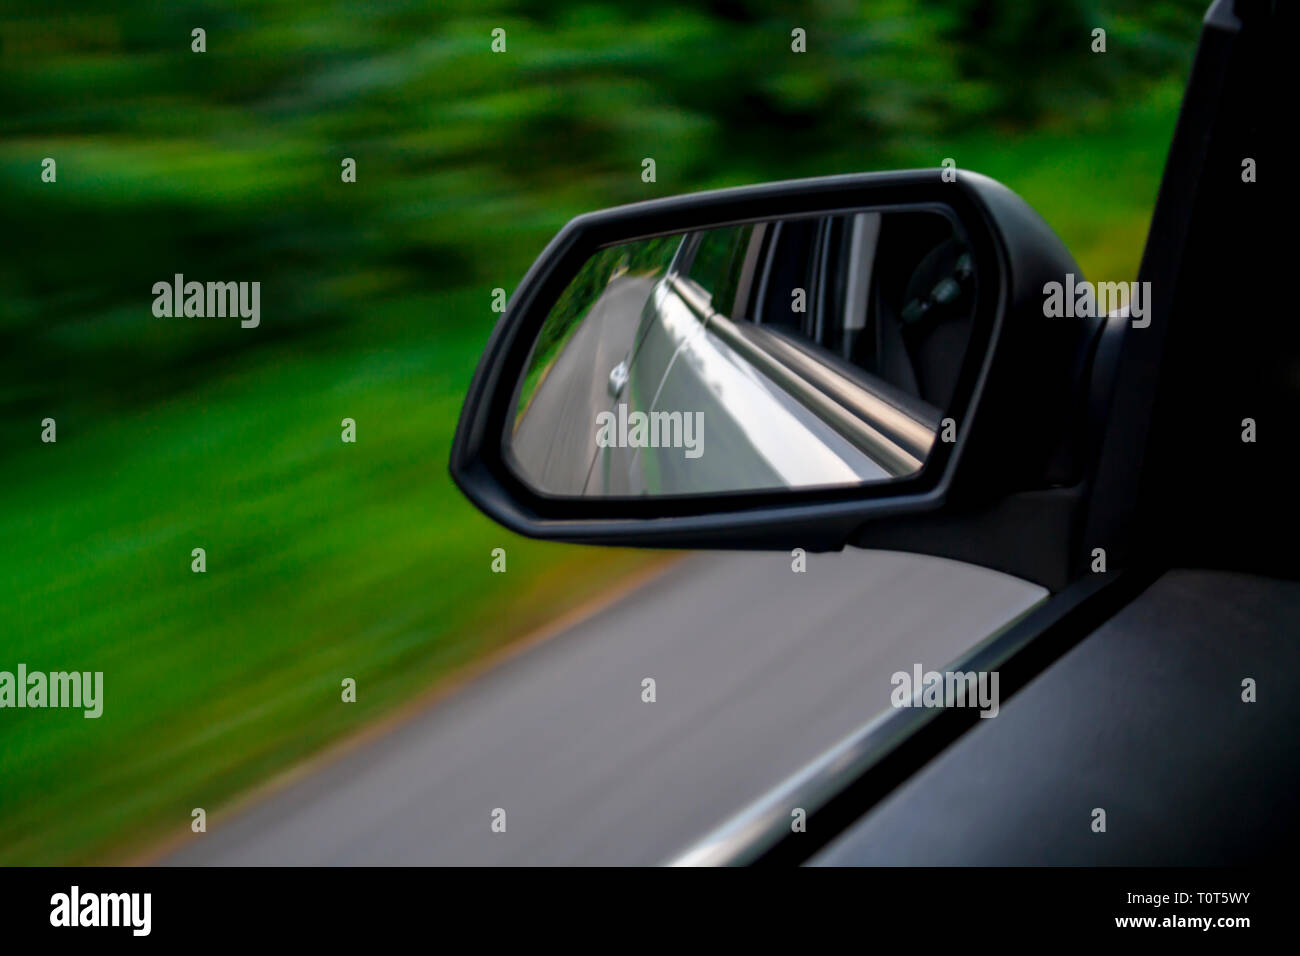 rear view mirror of driving car Stock Photo